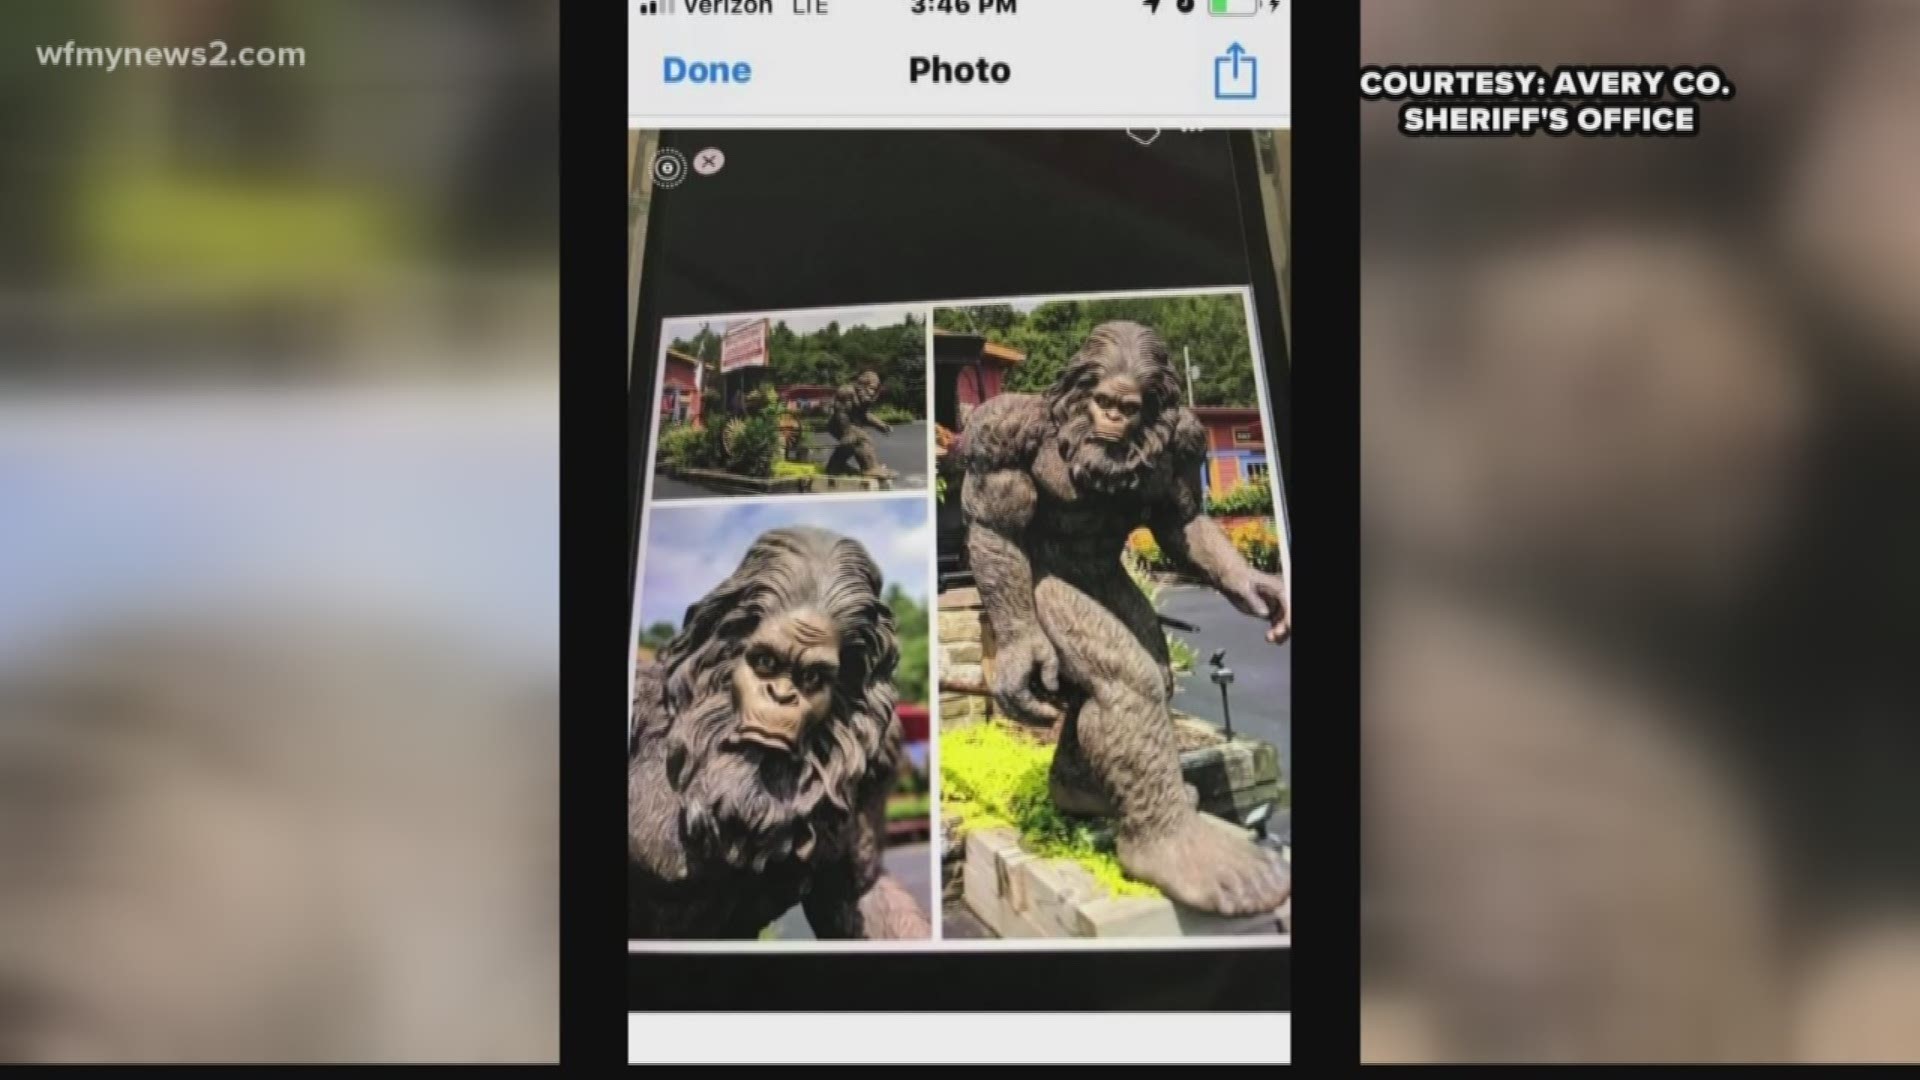 After the bigfoot statue had been missing for a few months, deputies found the creature in the middle of the woods